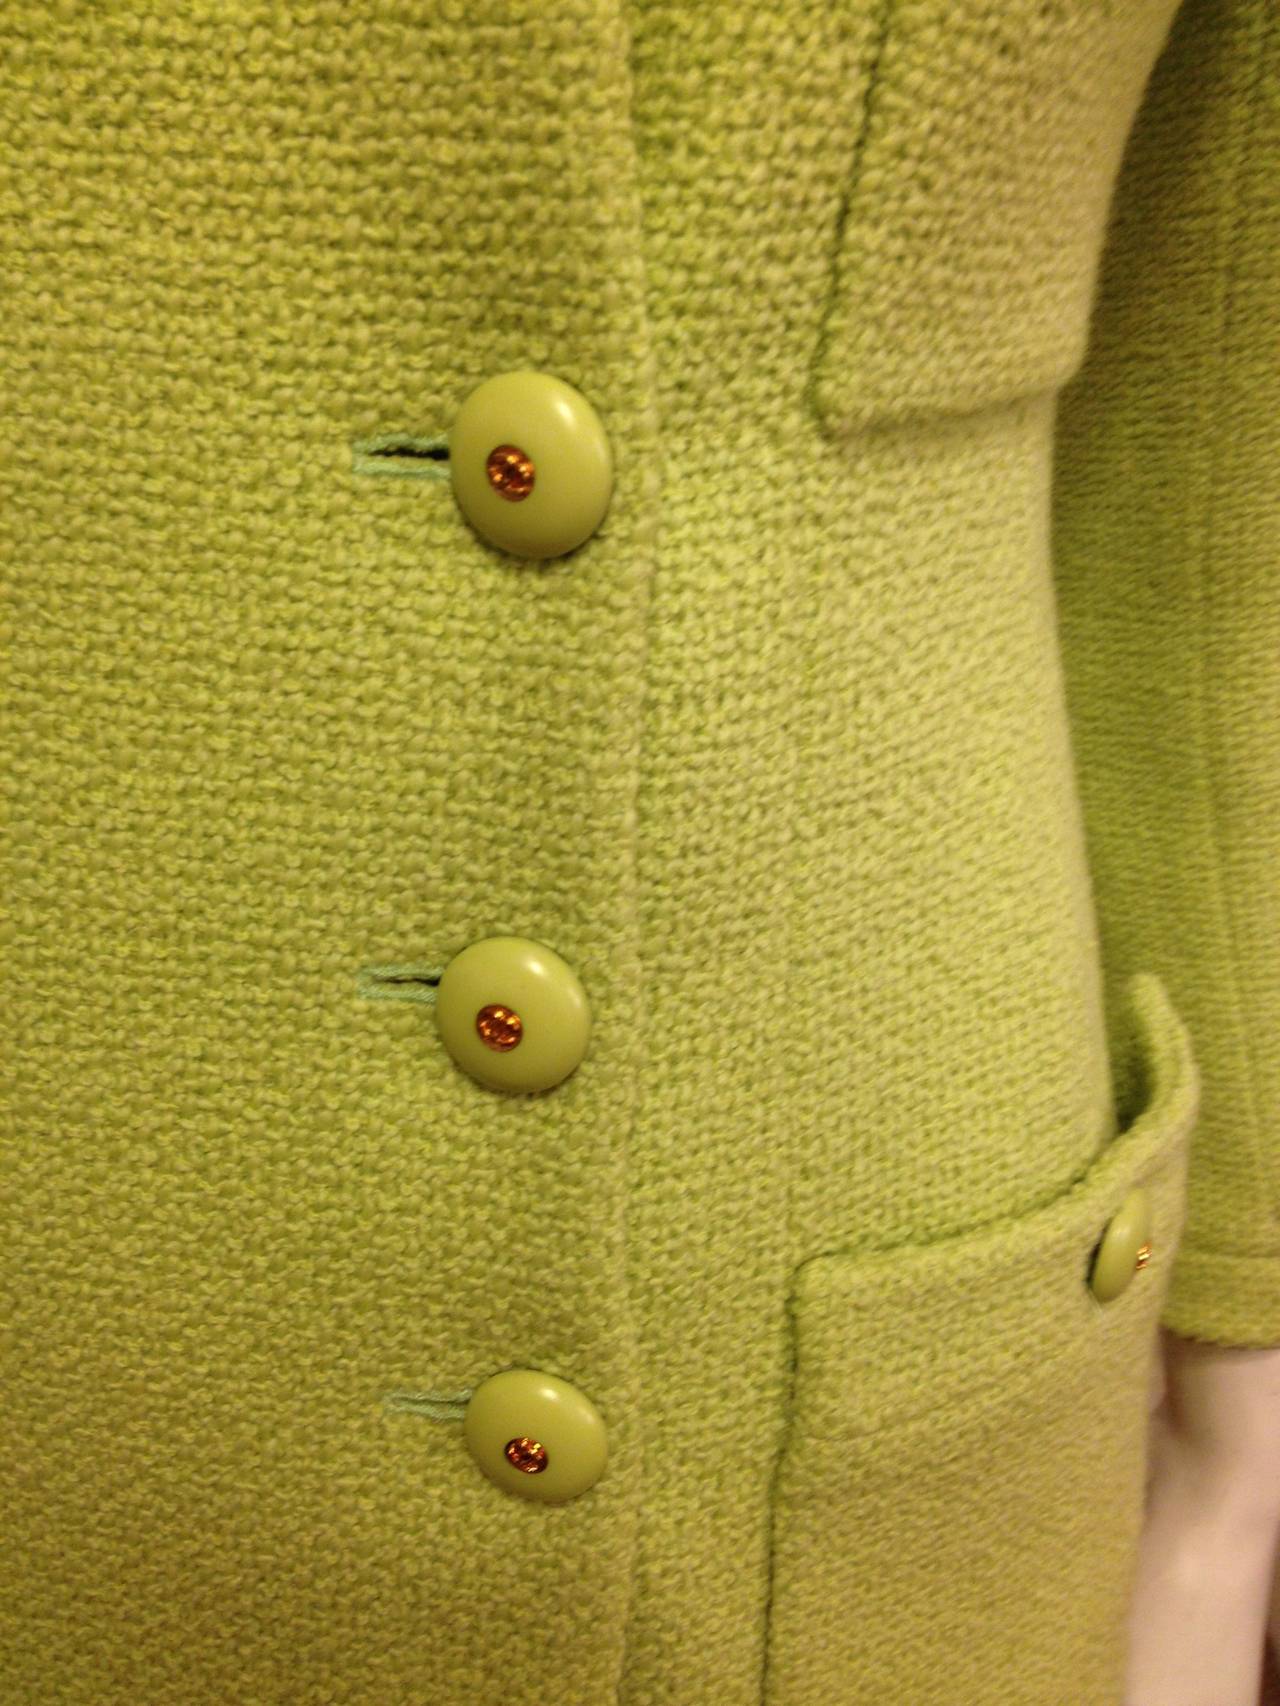 Stand out from the crowd! This Chanel bright green jacket is bold and fun with a pop-art sensibility. The deep scoop neck is modern and easy, while the four front pockets add symmetry to the design and add a useful element. Six rhinestone buttons